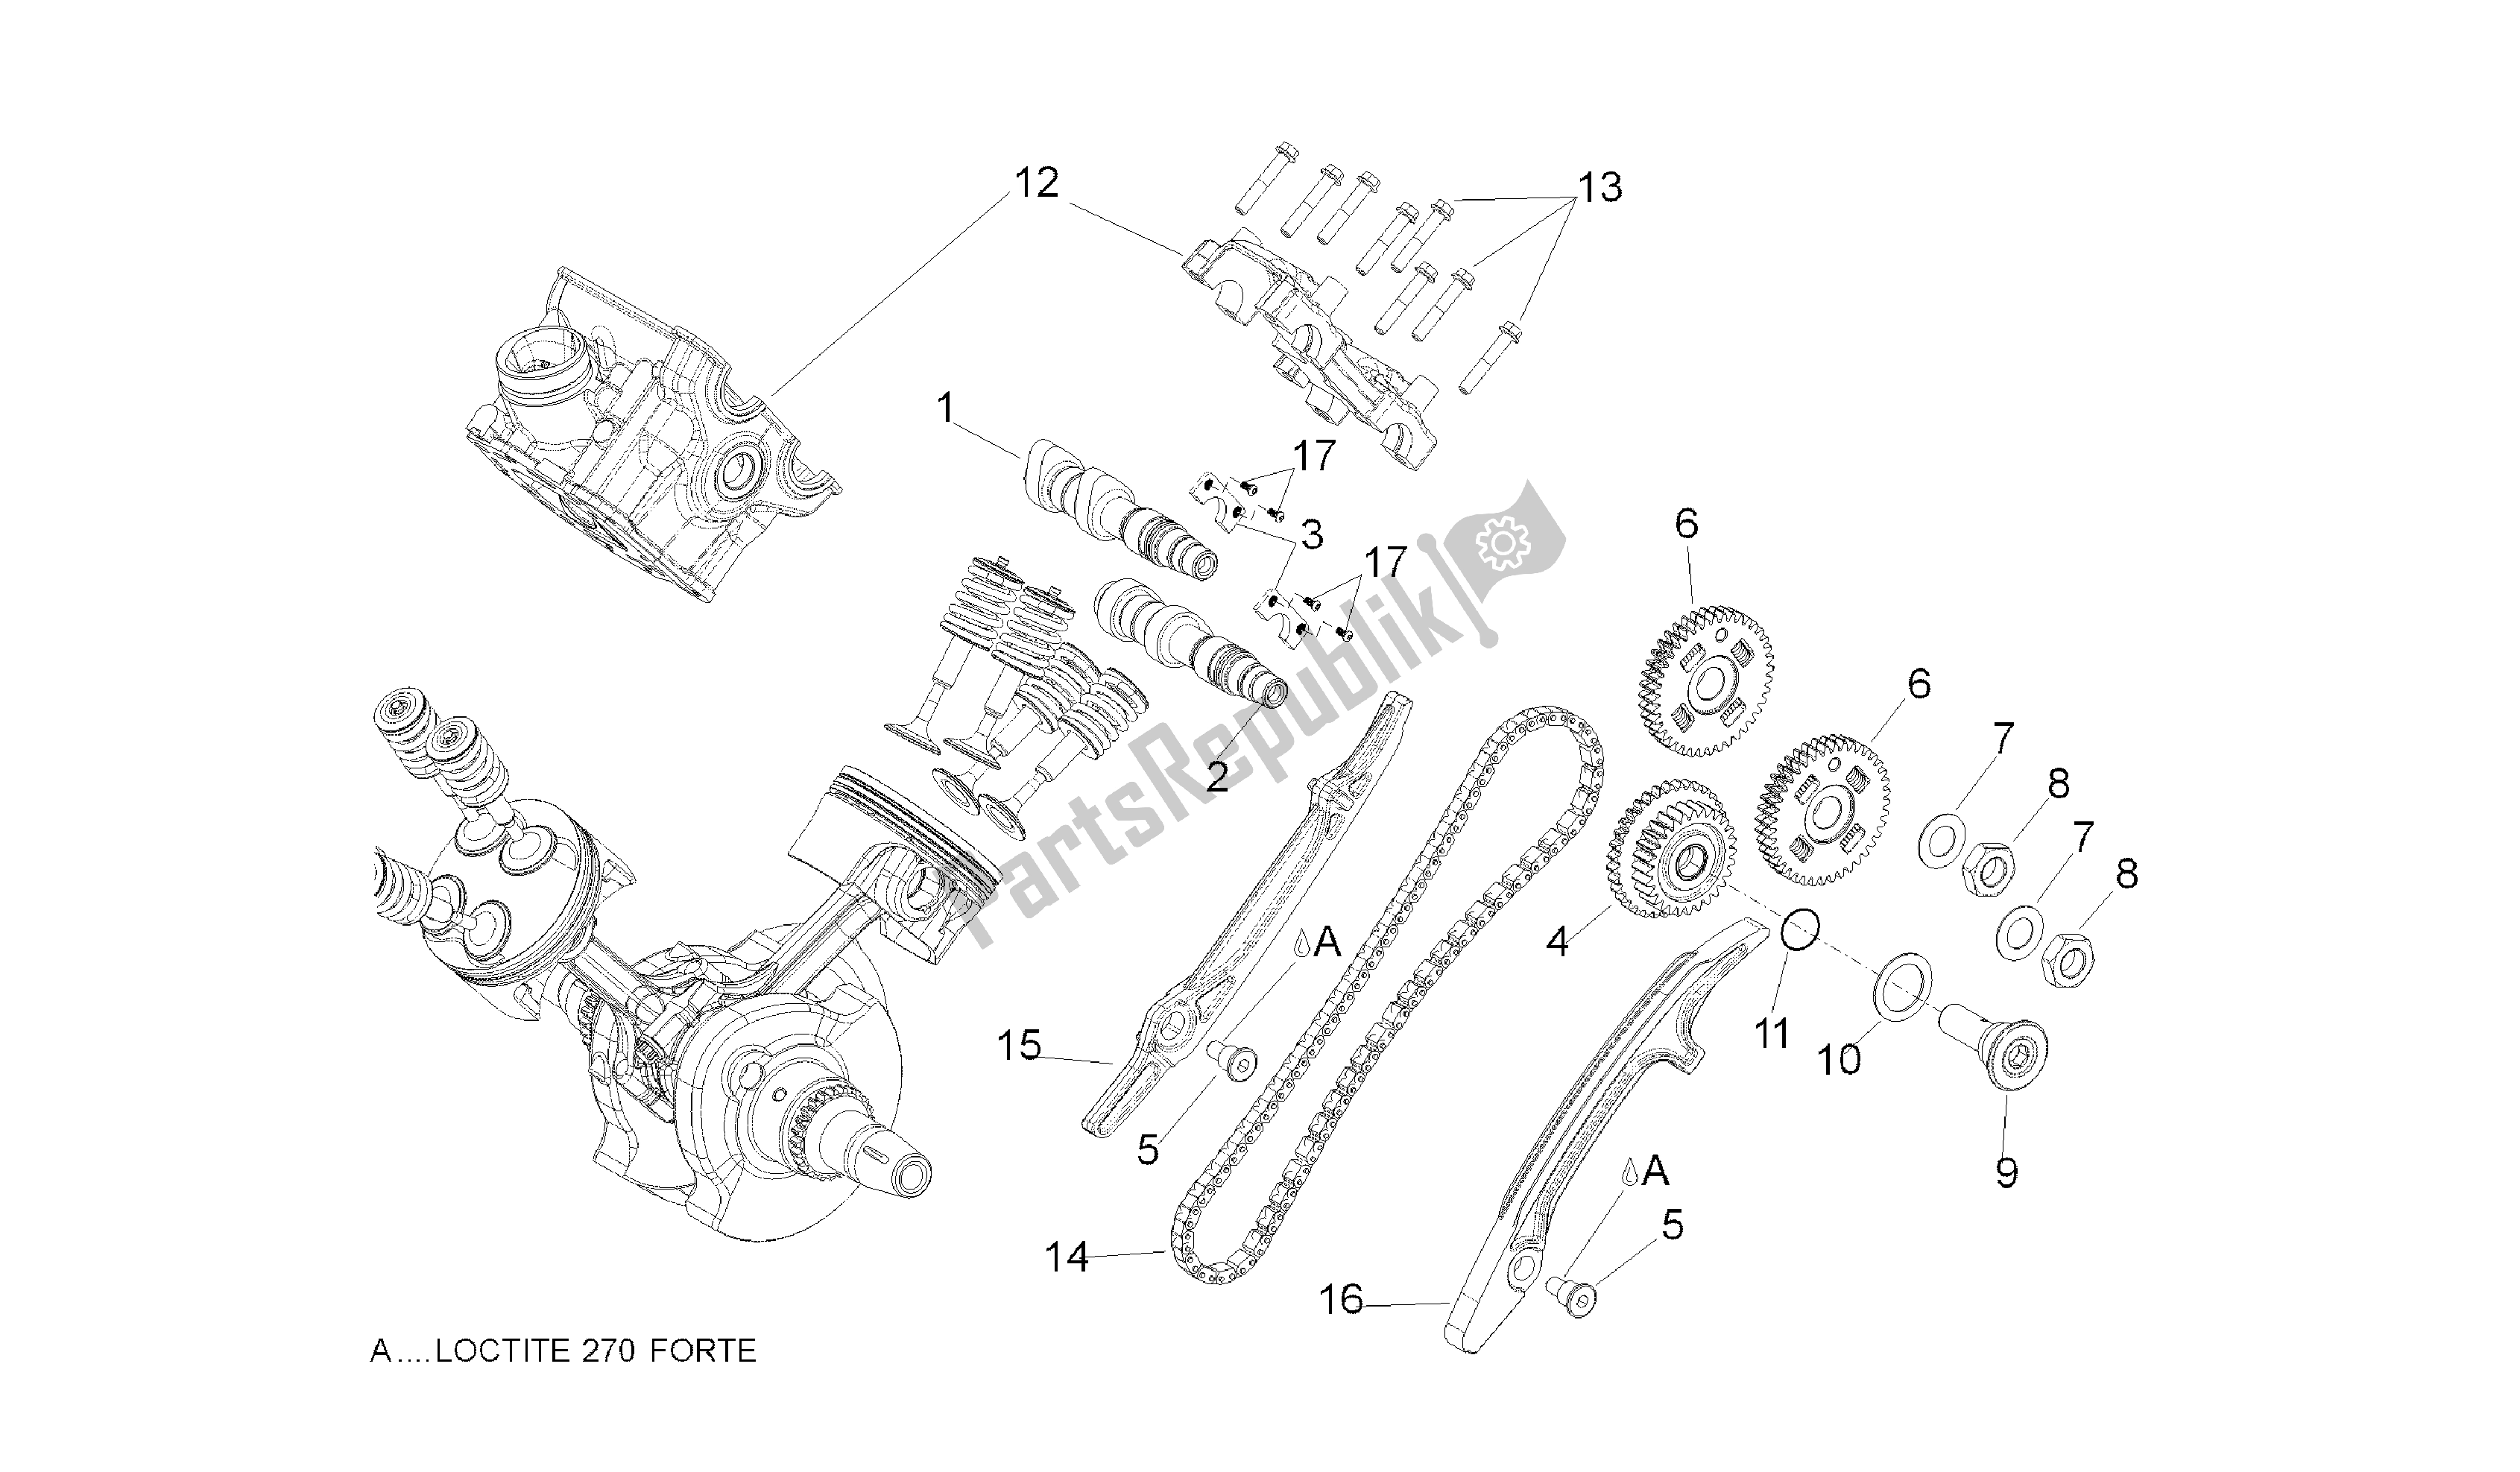 All parts for the Rear Cylinder Timing System of the Aprilia Shiver 750 2007 - 2009